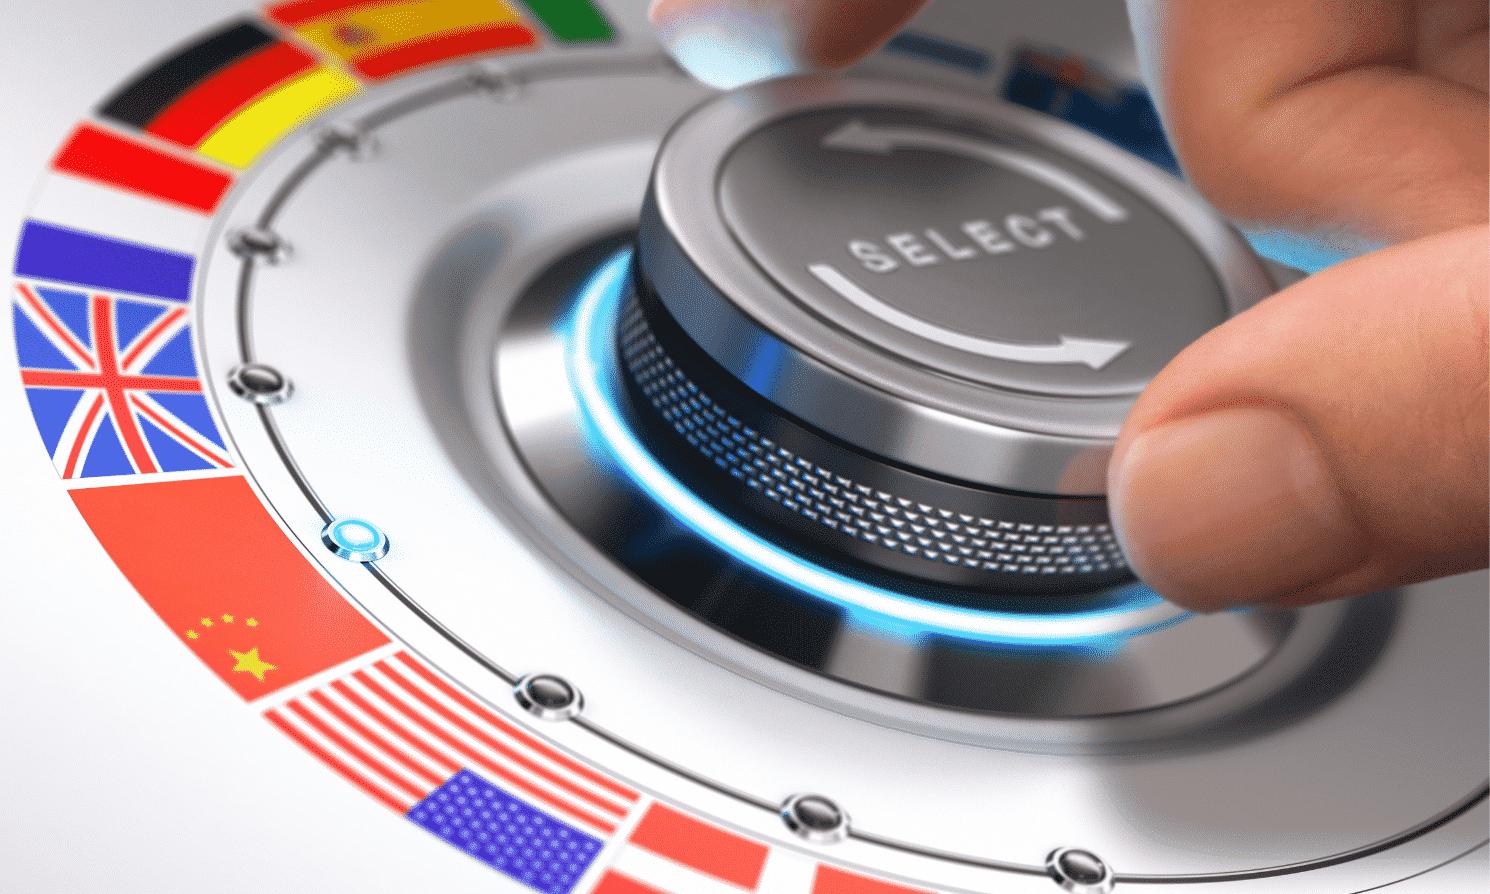 volume control dial with national flags to represent different languages and translation